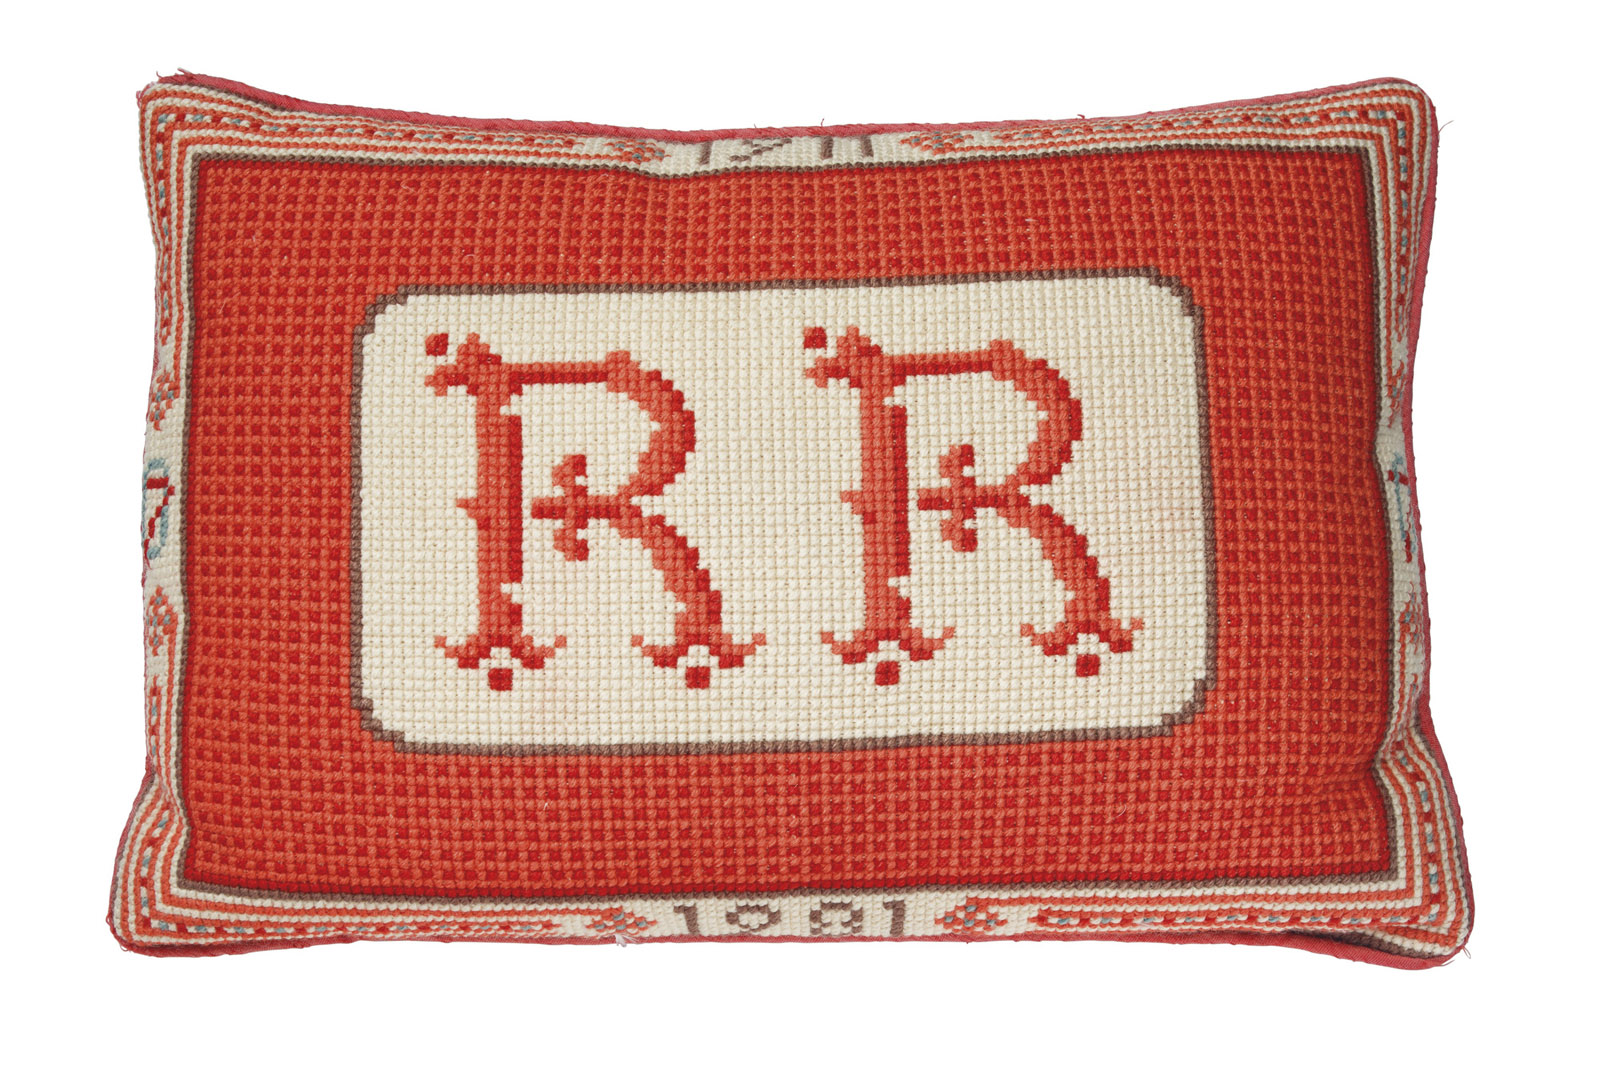 This undated photo provided by Christie's shows a needlepoint cushion given to Ronald Reagan for his 70th birthday in 1981. The pillow, which will be sold by Christie's New York during a two-day auction of the contents of Ronald and Nancy Reagan's ranch-style home in California, has a pre-sale estimate of $1,000-1,500. Christieâ€™s announced Thursday, June 30, 2016, highlights of the Sept. 21-22 sale in New York City. (Christie's via AP) MANDATORY CREDIT